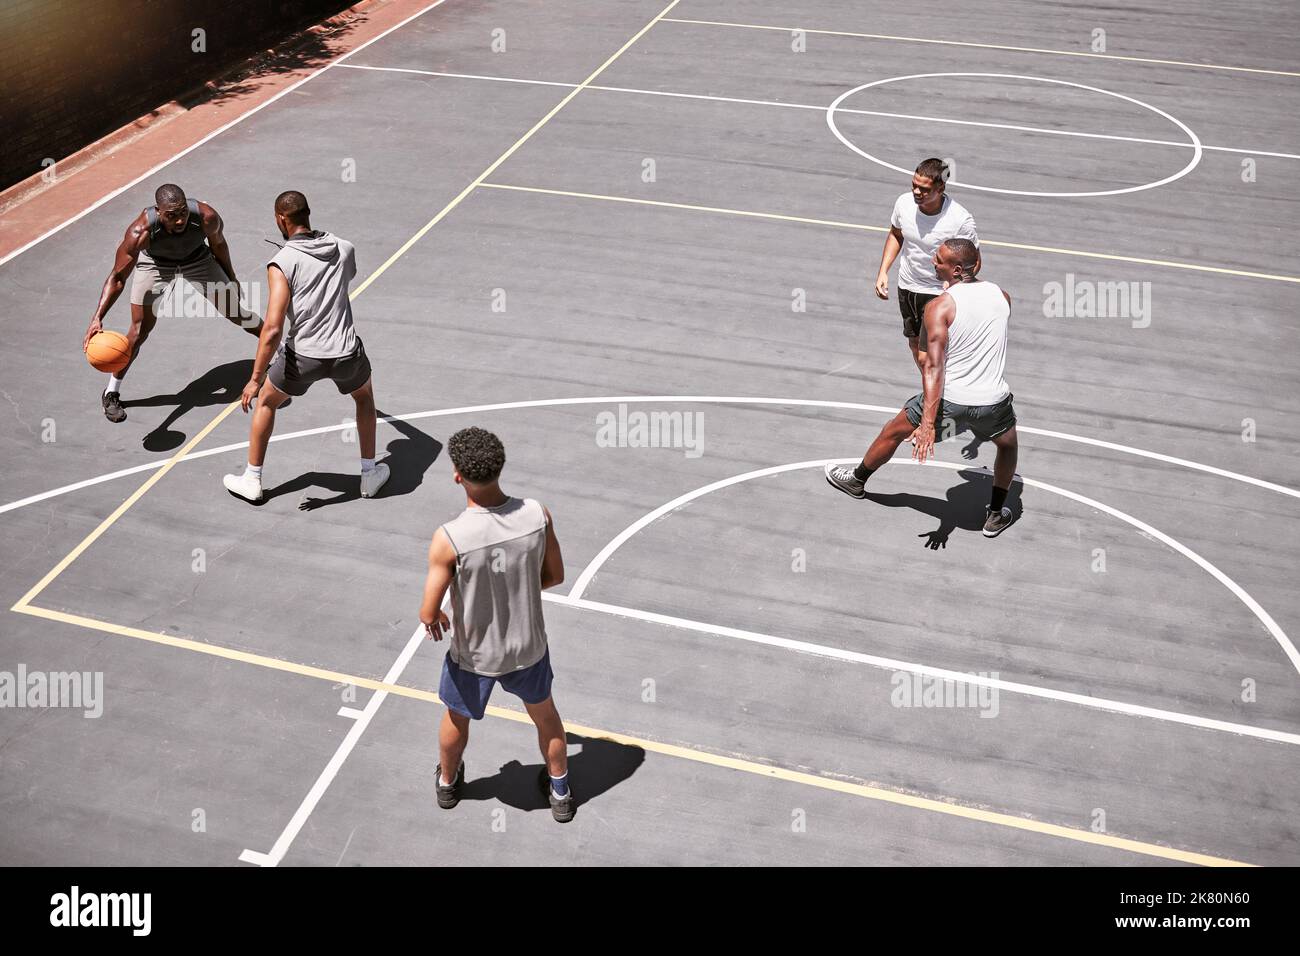 Basketball court, fitness men or competition game in workout, training or exercise in New York for health, wellness or fitness. Men, basketball player Stock Photo